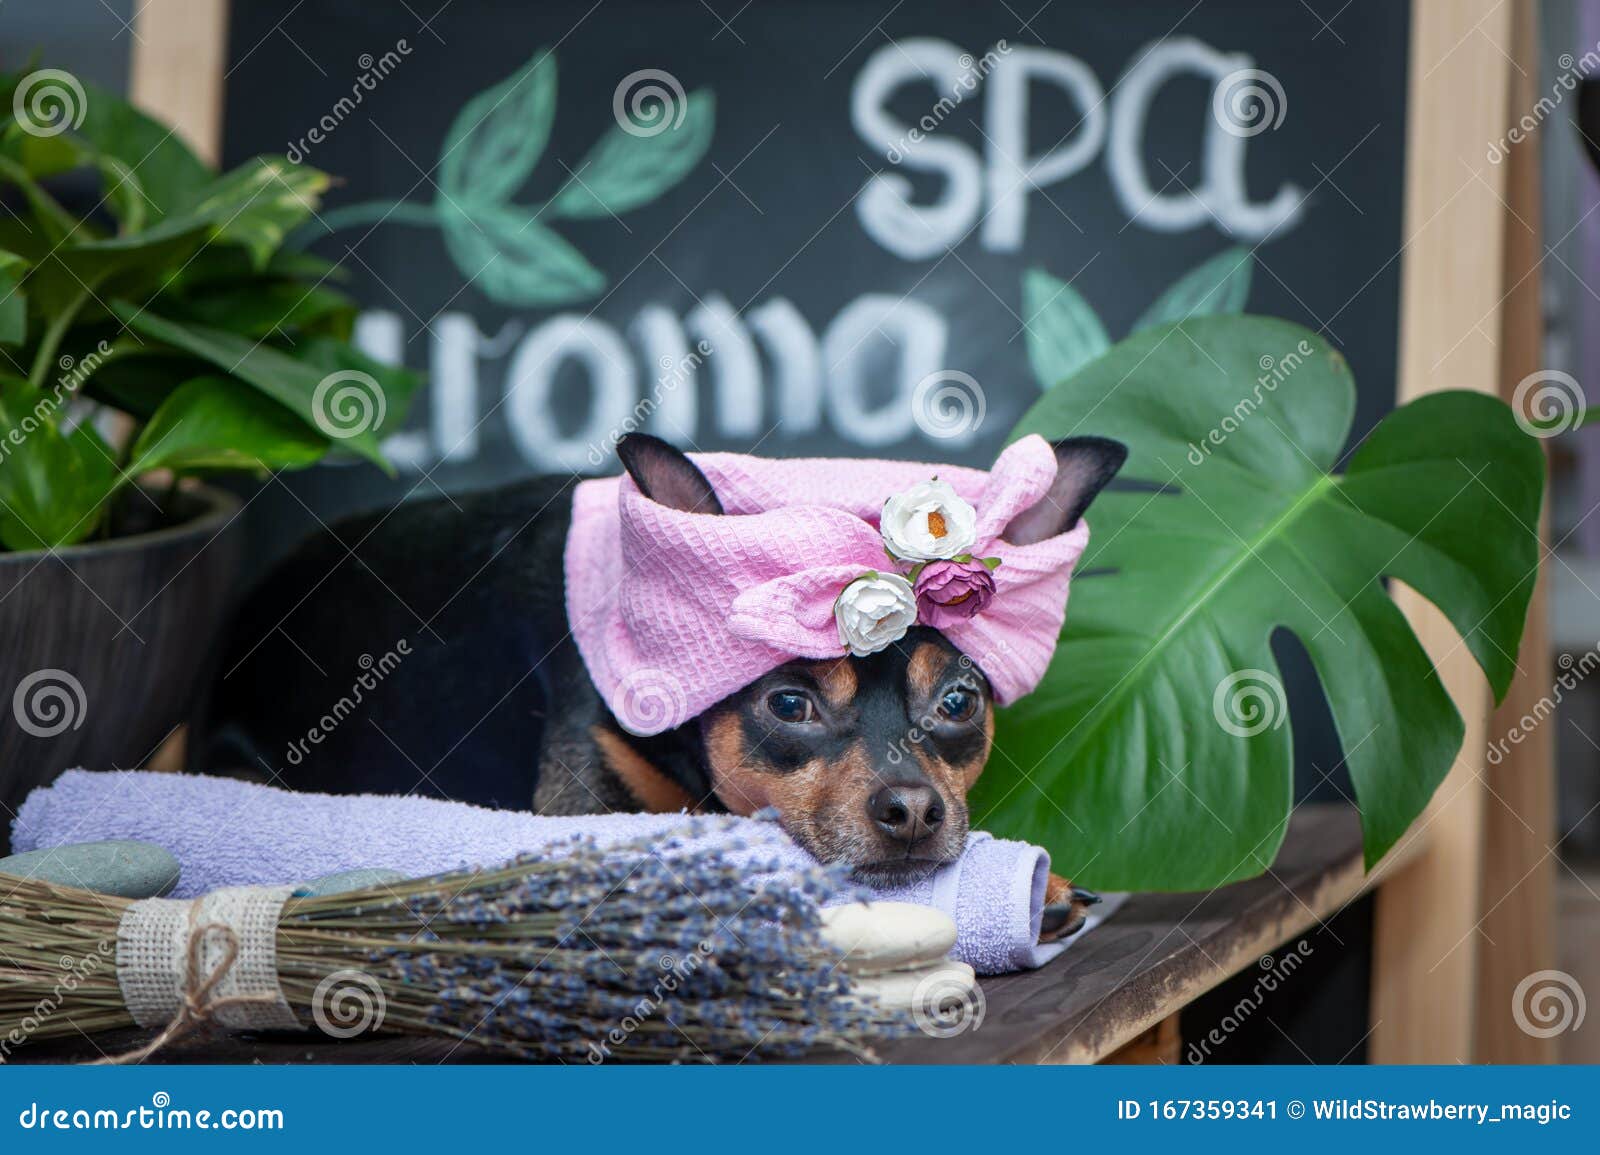 Â Cute Pet Relaxing in Wellness . Dog in a Turban of a Towel among the Spa Items and Plants Stock Image - Image of rest, mask: 167359341